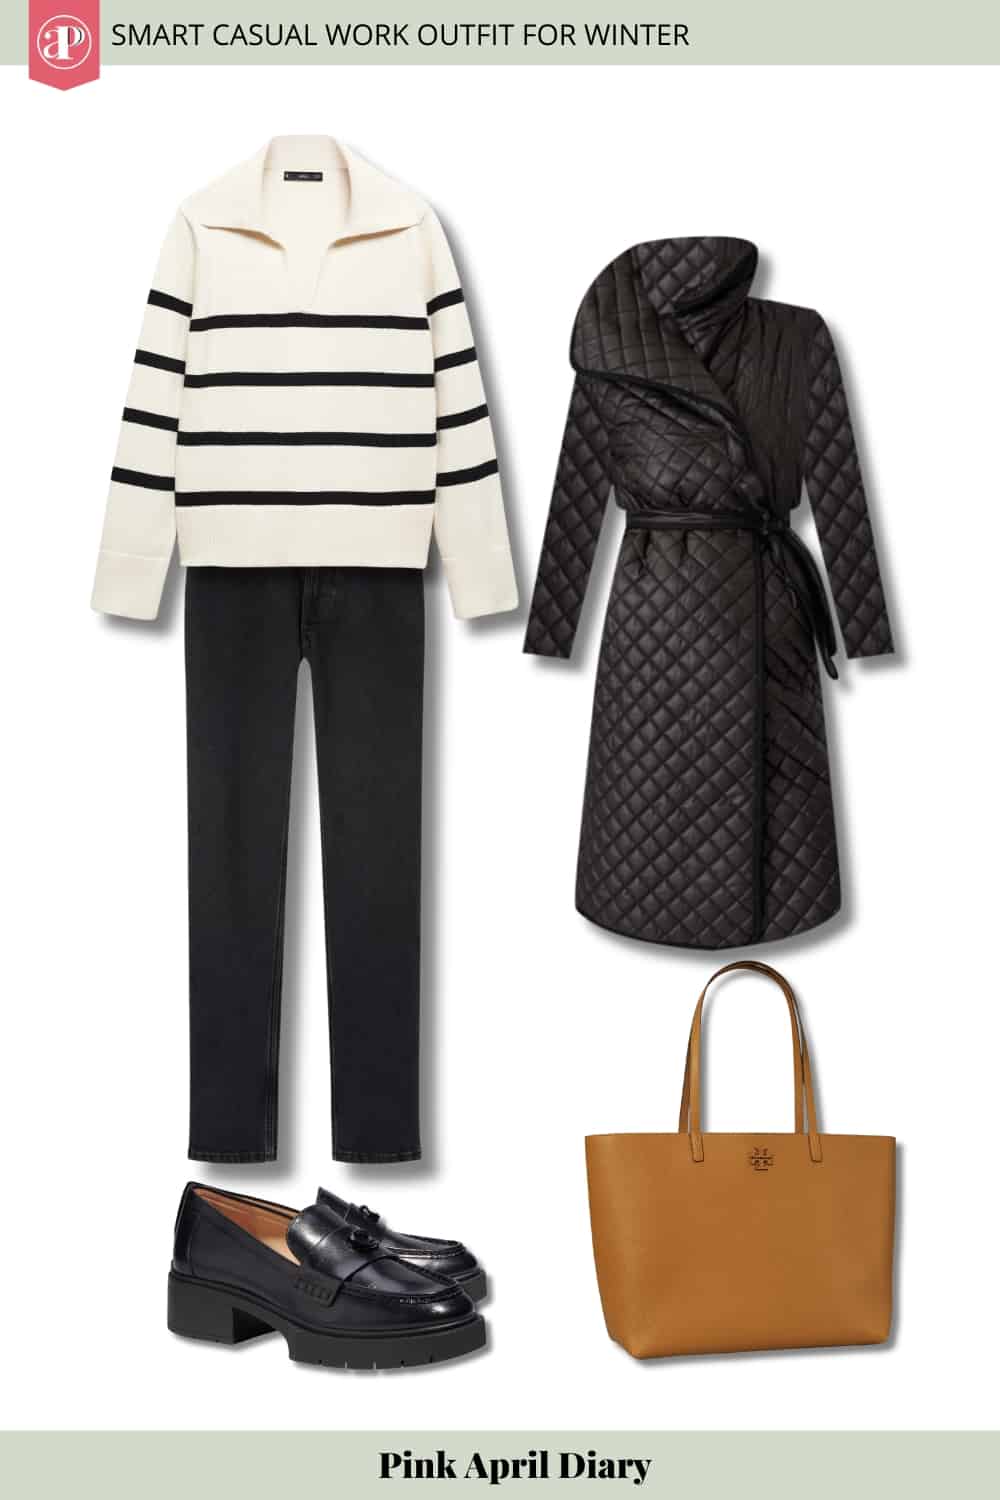 Smart Casual Winter Work Outfit 6